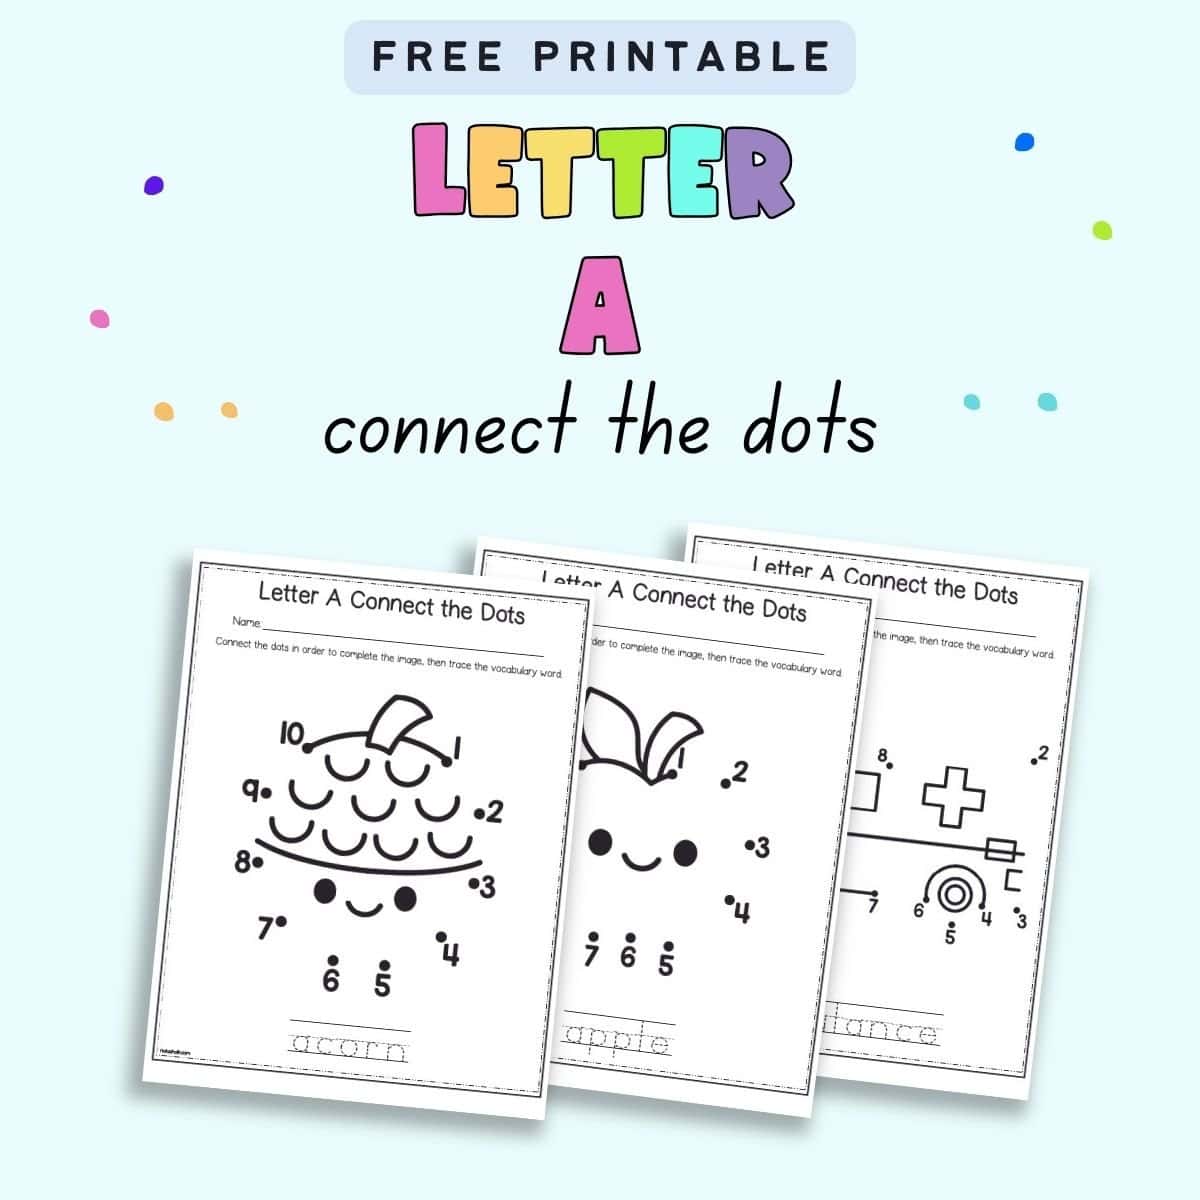 Text "free printable letter a connect the dots" with a preview of three pages with connect the dots images 1-10 showing items that start with the letter a